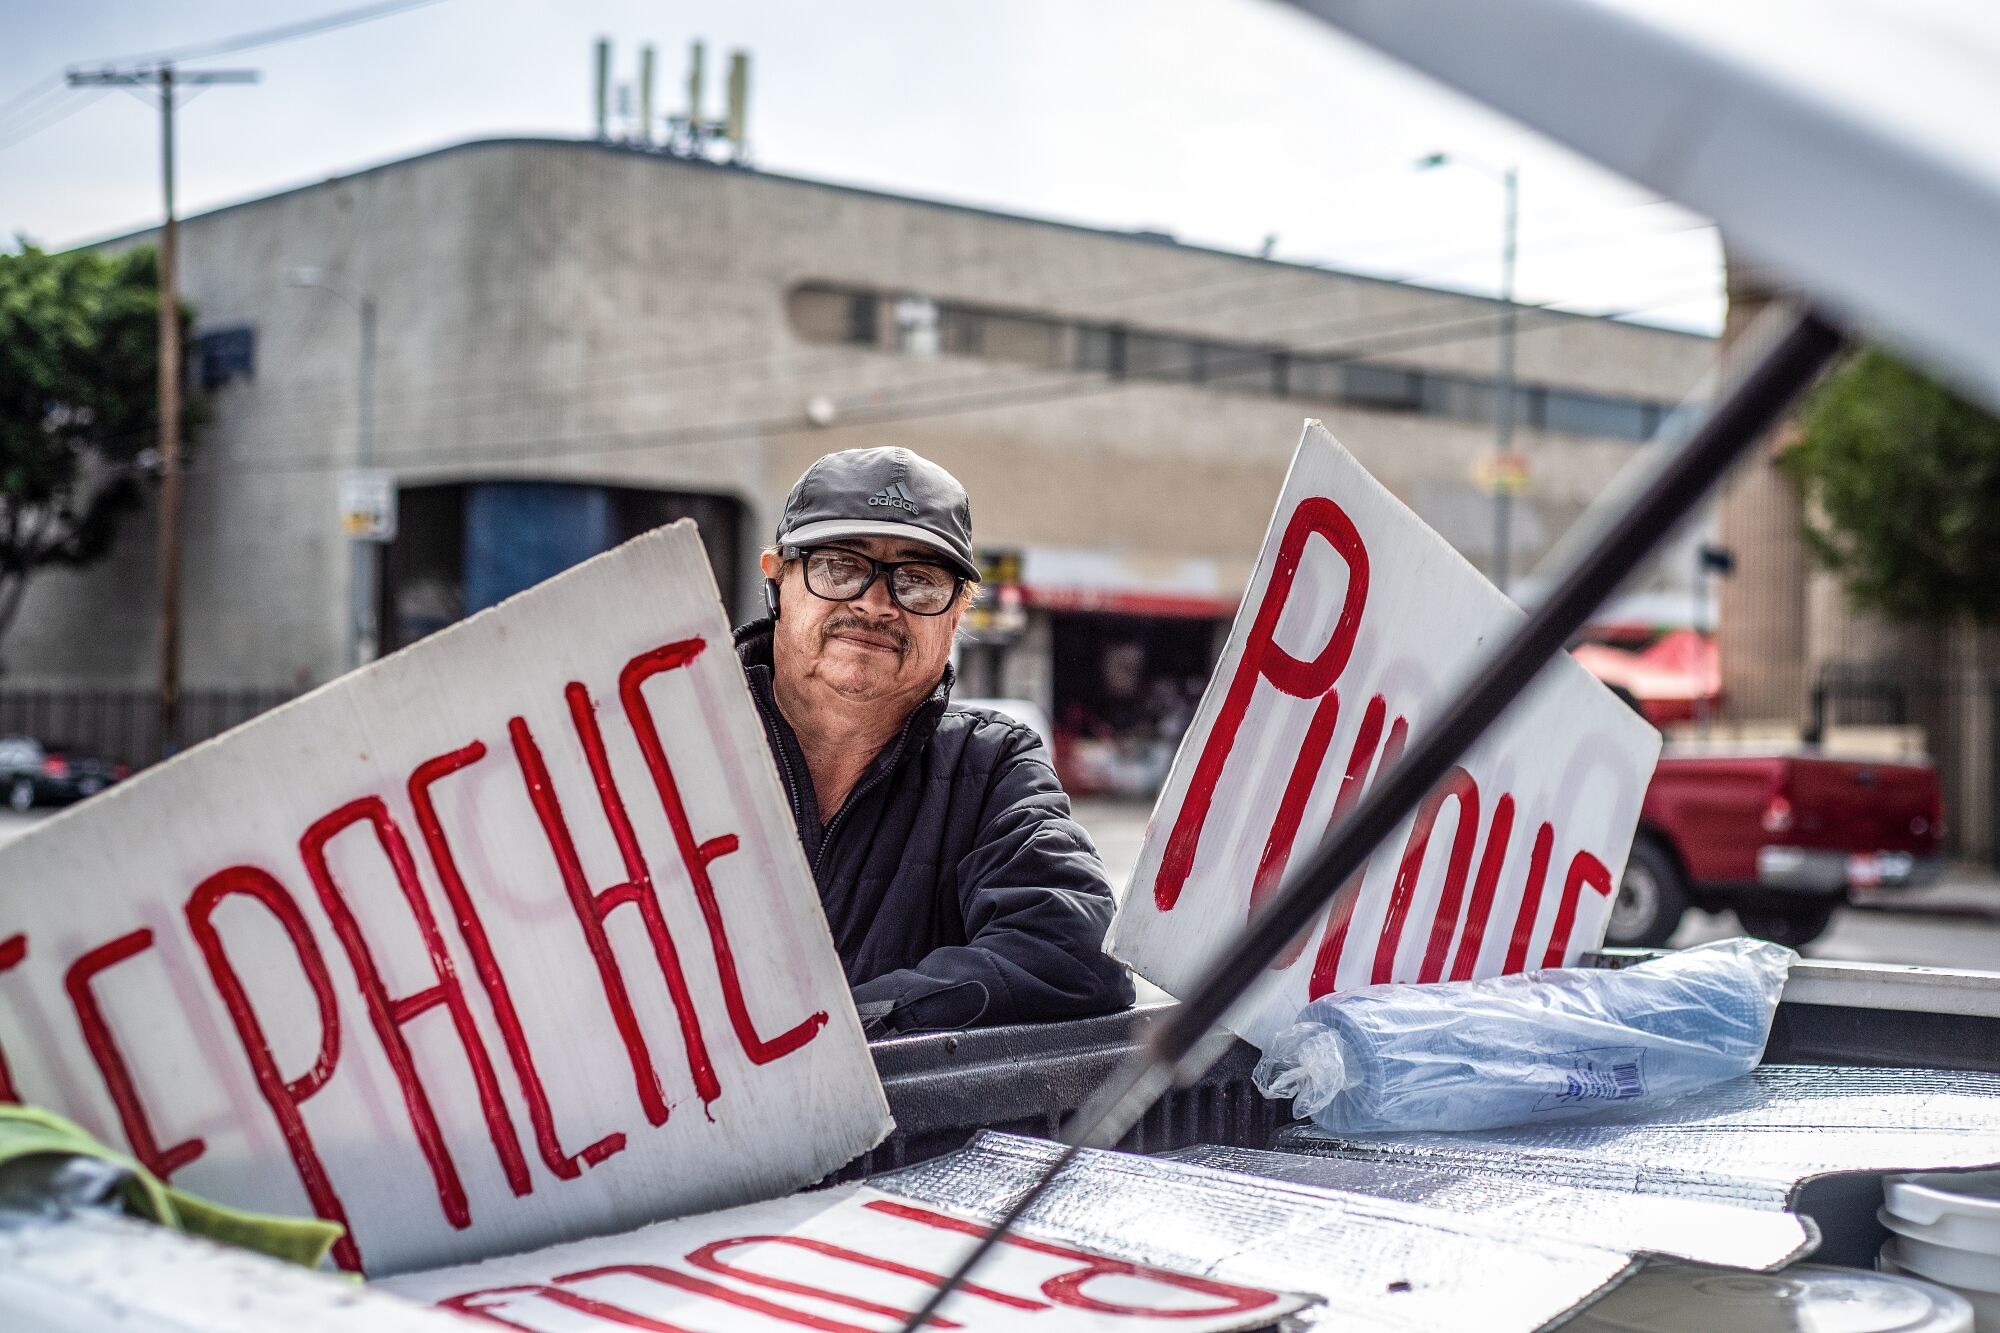 A man with signs that read "tepache" and "pulque."